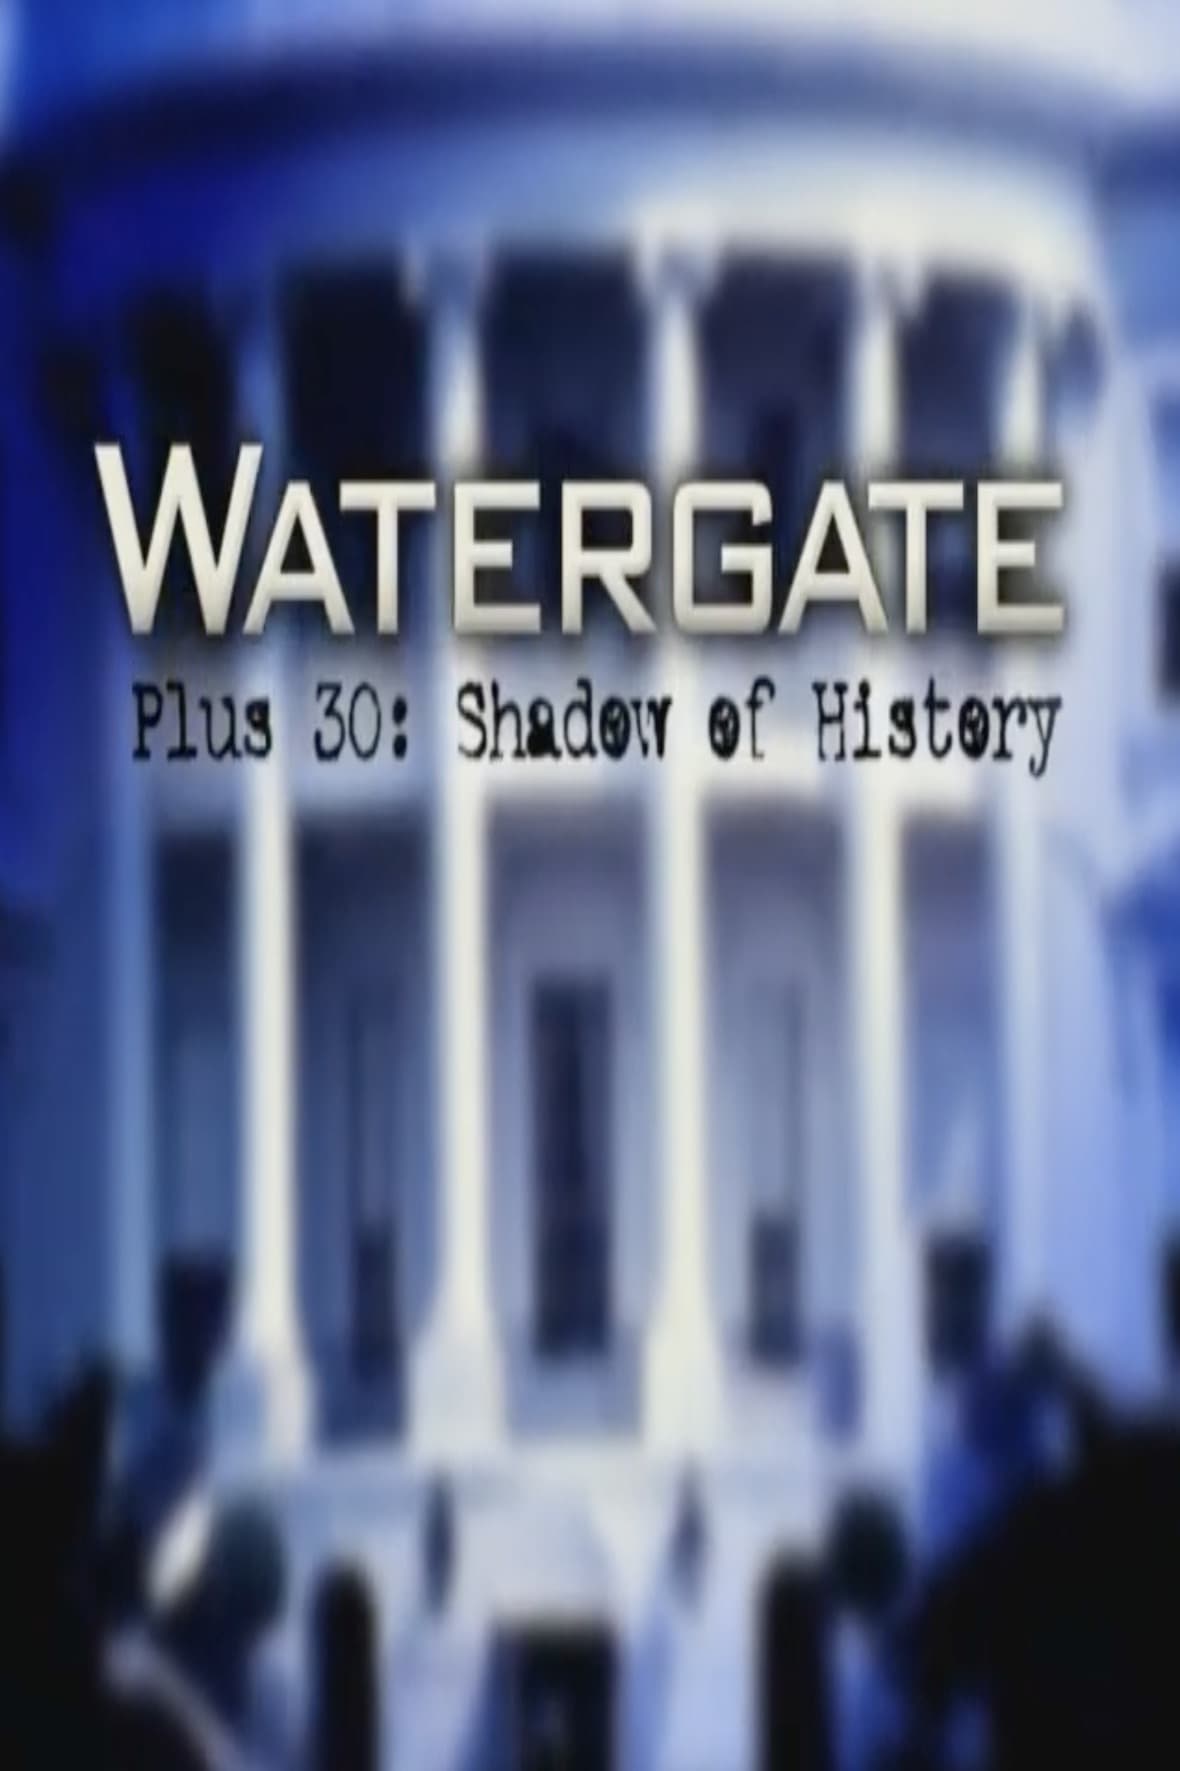 Watergate Plus 30: Shadow of History